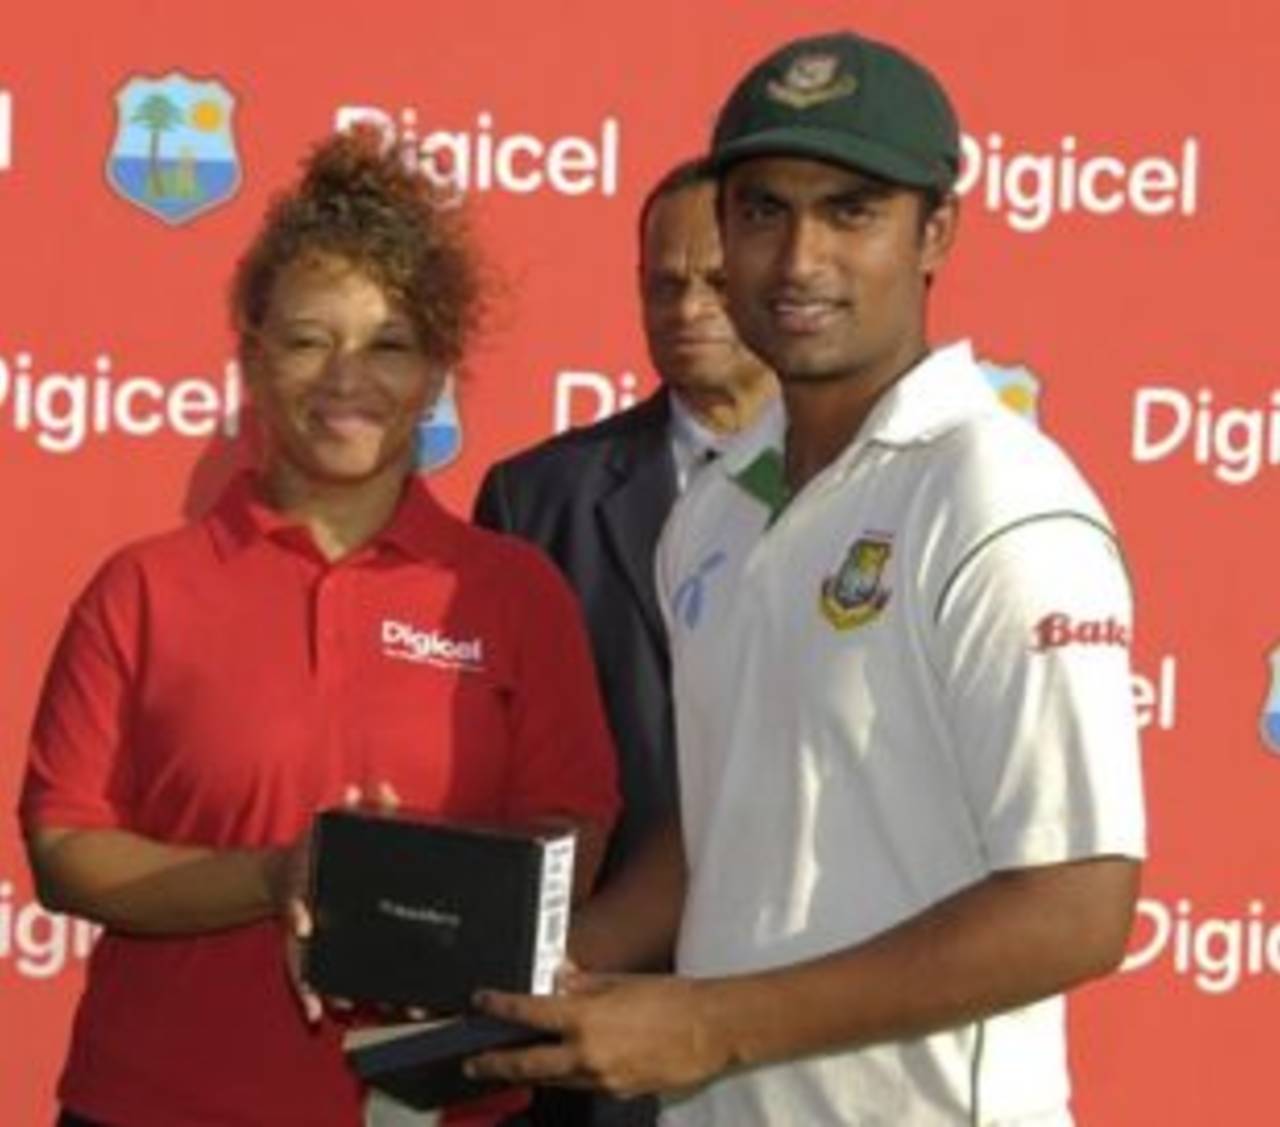 Tamim Iqbal was named Man of the Match for his maiden Test century which enabled his team to post a substantial target&nbsp;&nbsp;&bull;&nbsp;&nbsp;&copy; DigicelCricket.com/Brooks La Touche Photography